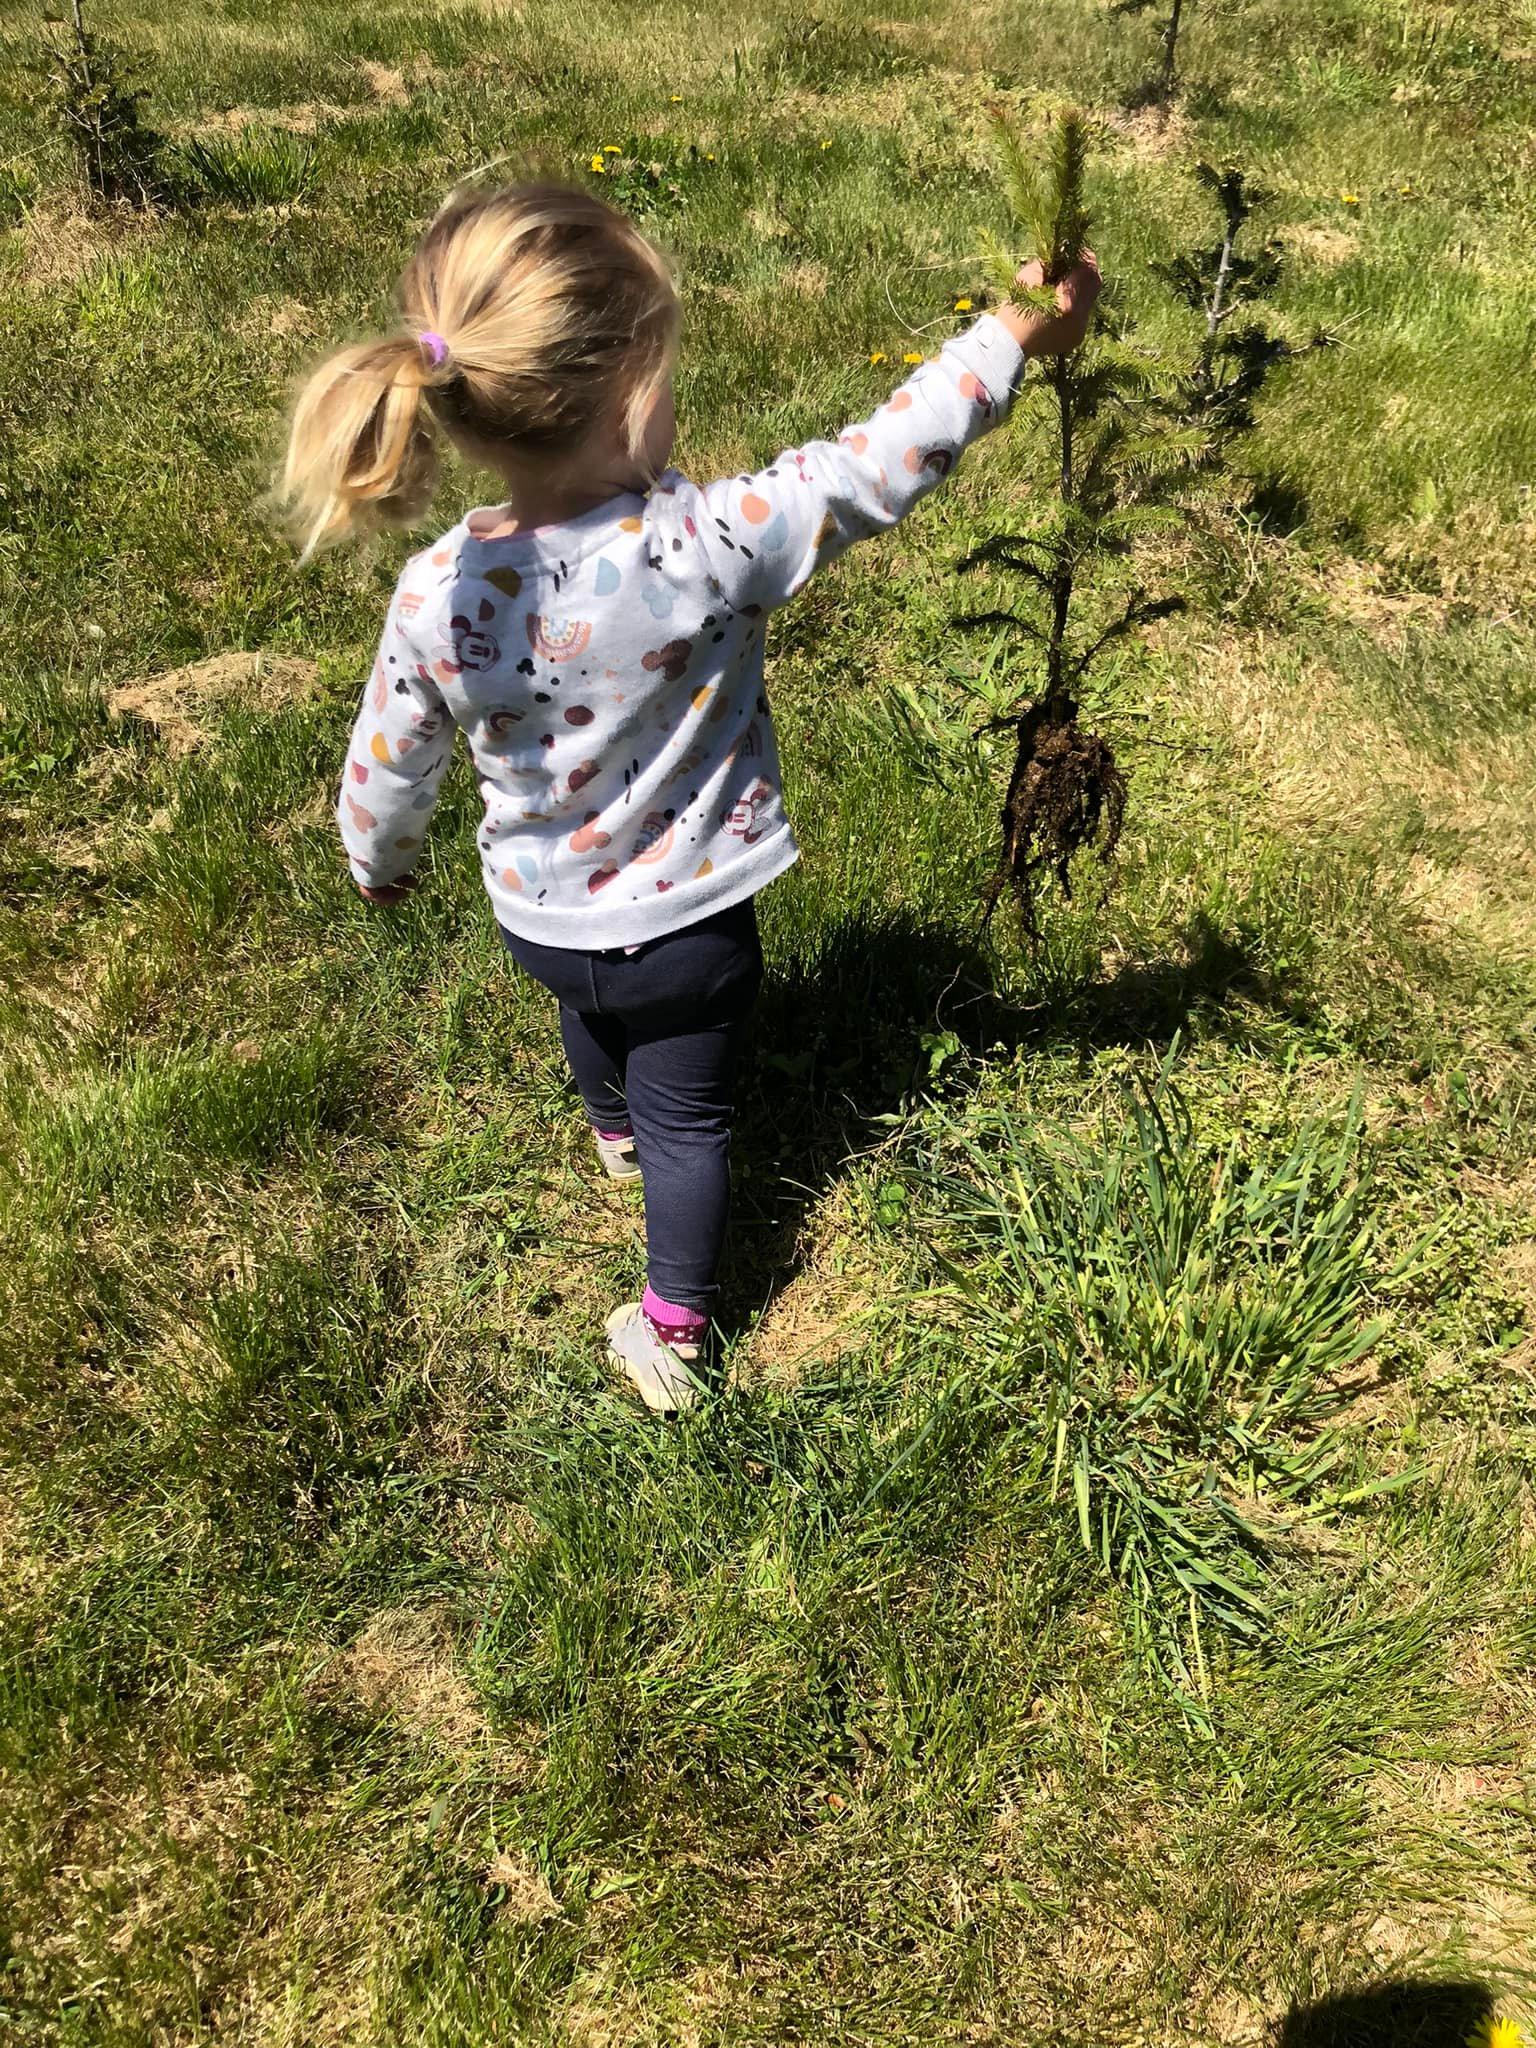 Meghan is carrying a transplant across the field for Opa Bruce to plant.  The tree is almost as tall as she is.